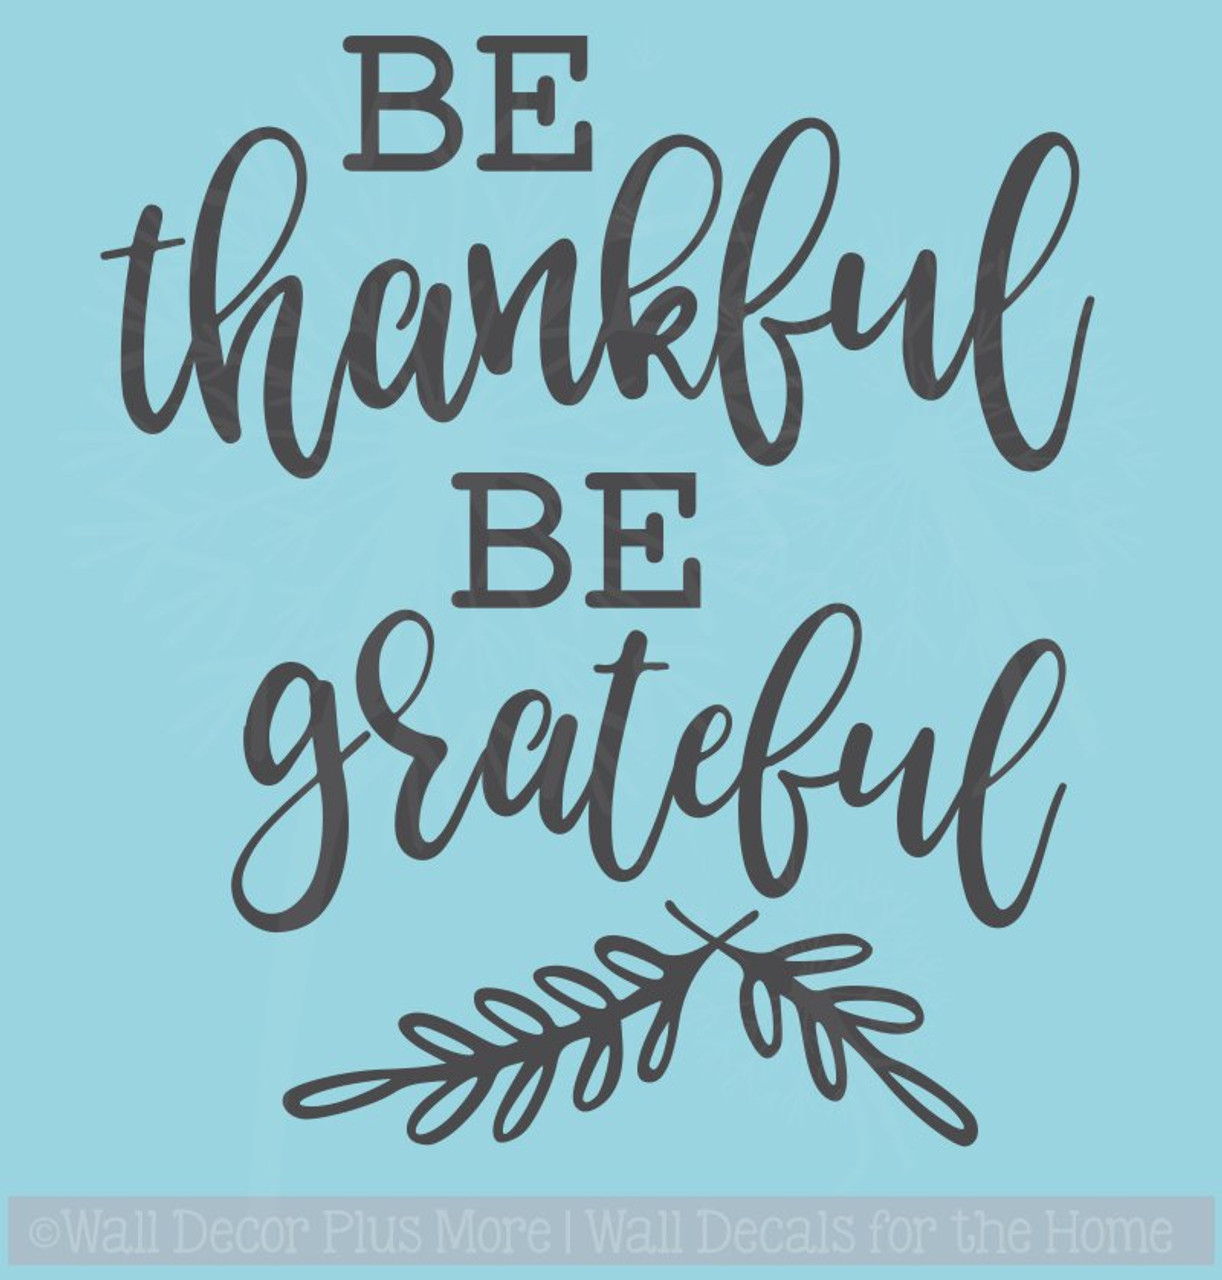 https://cdn11.bigcommerce.com/s-571px4/images/stencil/1280x1280/products/2365/10835/WD1159_Be_Thankful_Be_Grateful_Laurel_Leaves_Vinyl_Car_Decals_Window_Sticker_Quote__82009.1541717207.jpg?c=2